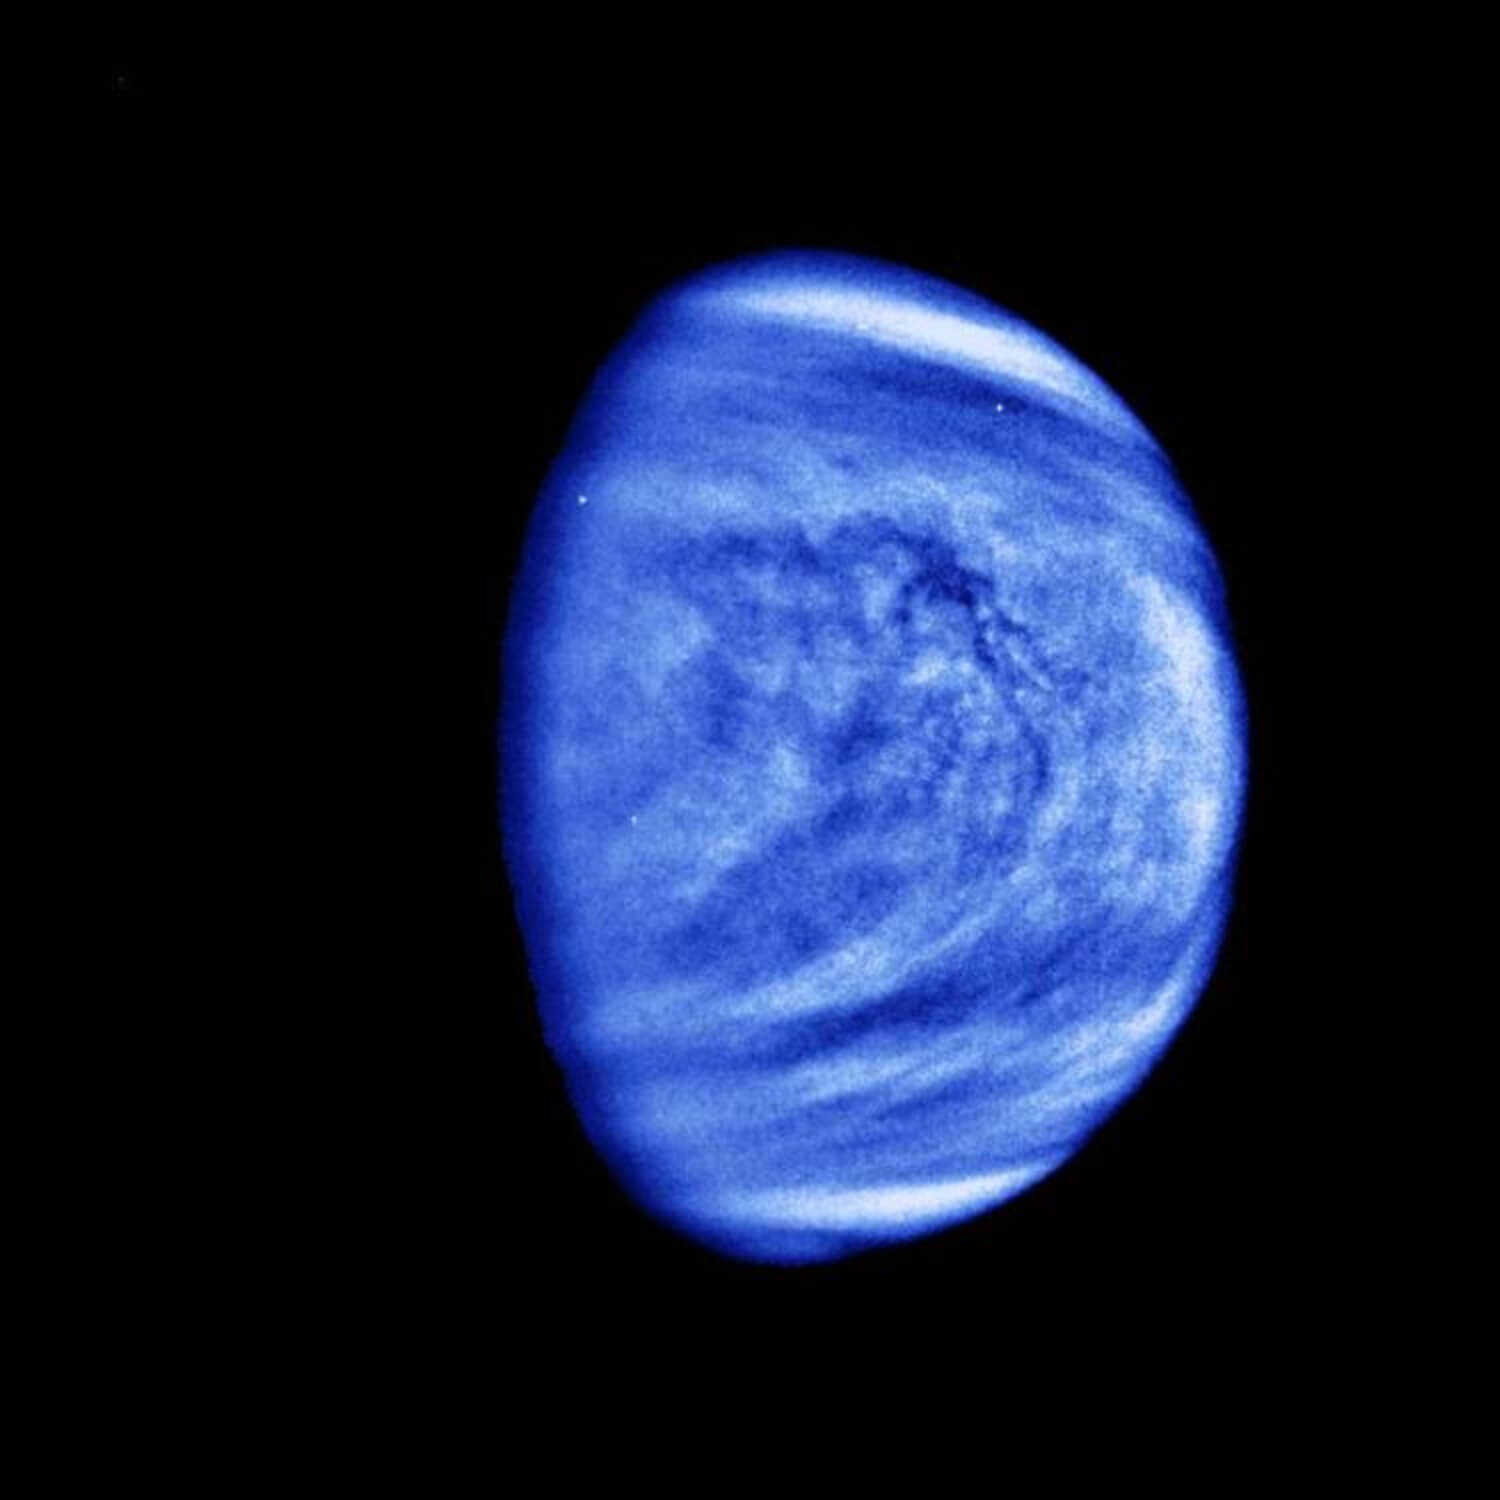 An image of Venus taken by NASA's Galileo spacecraft in 1990, shown in false color to highlight the sulfuric acid clouds swirling above the planet's surface